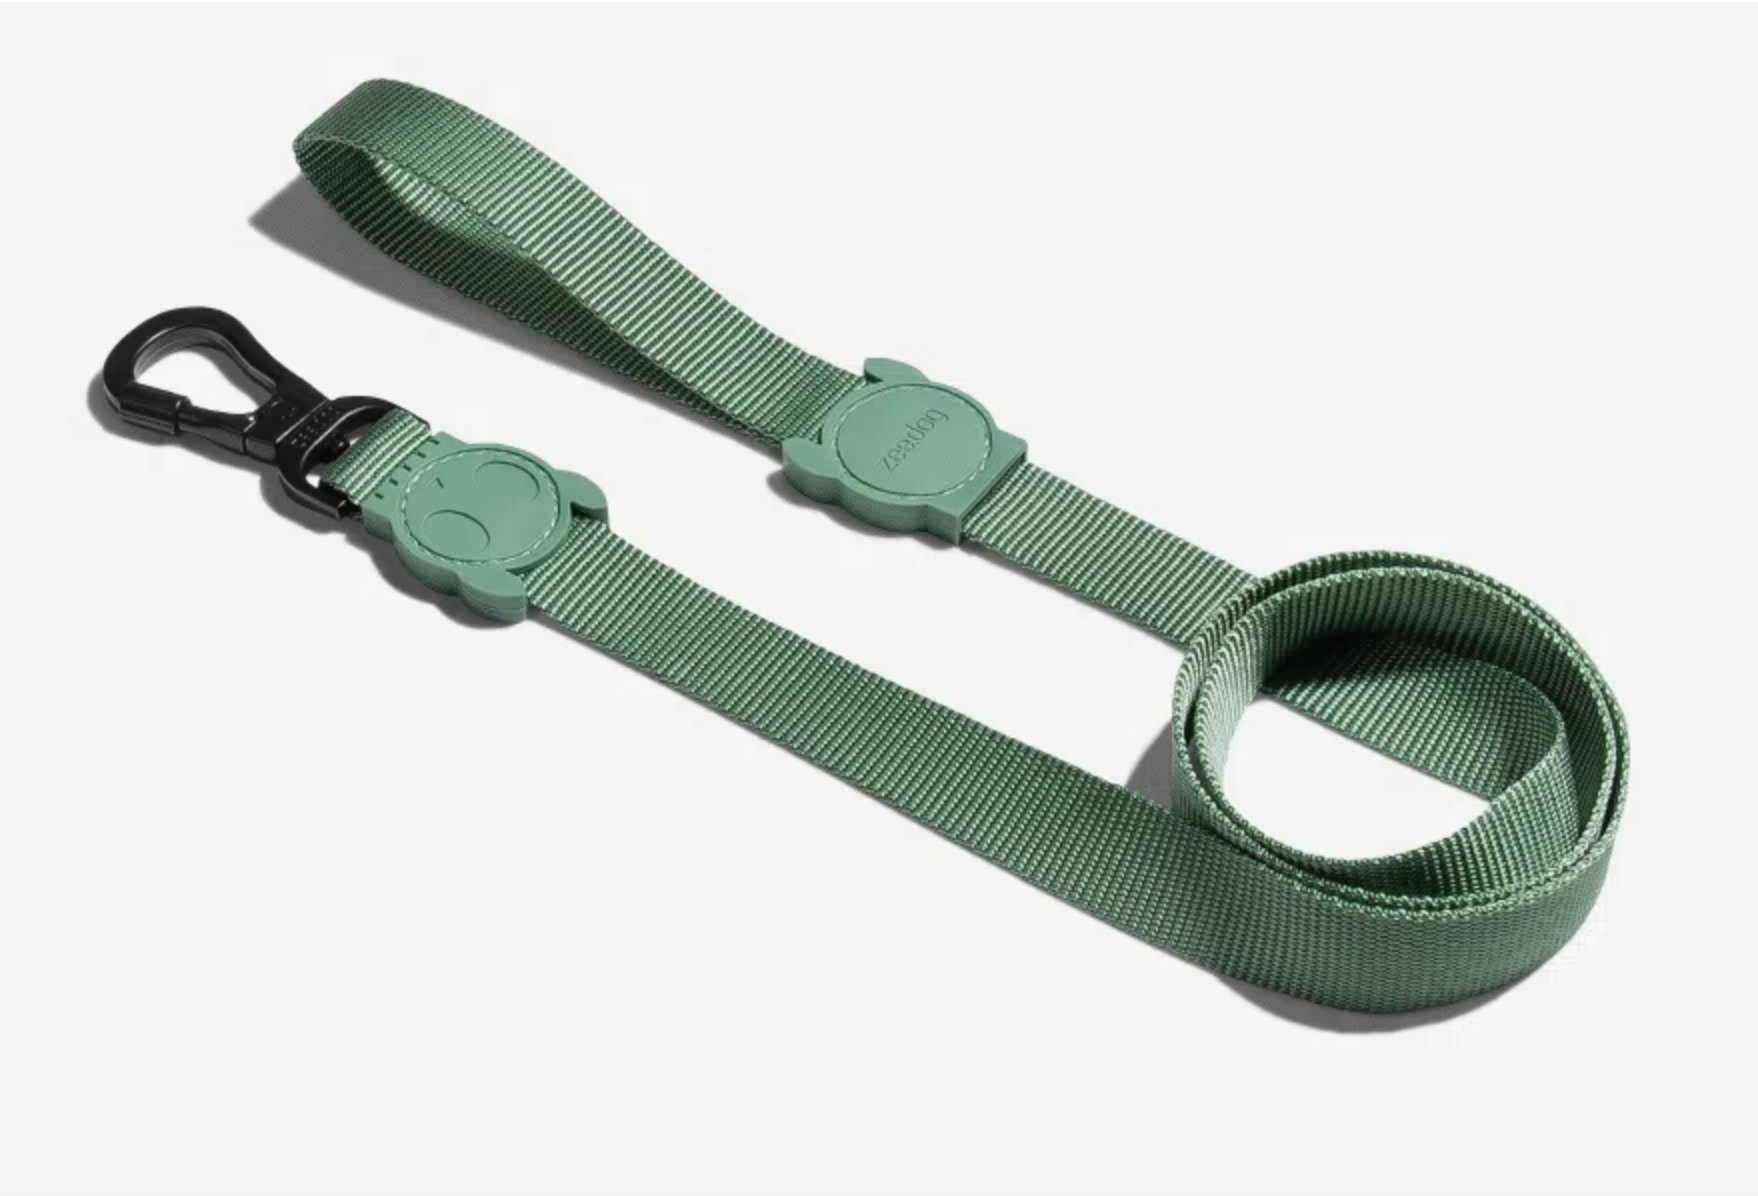 Army green leiband